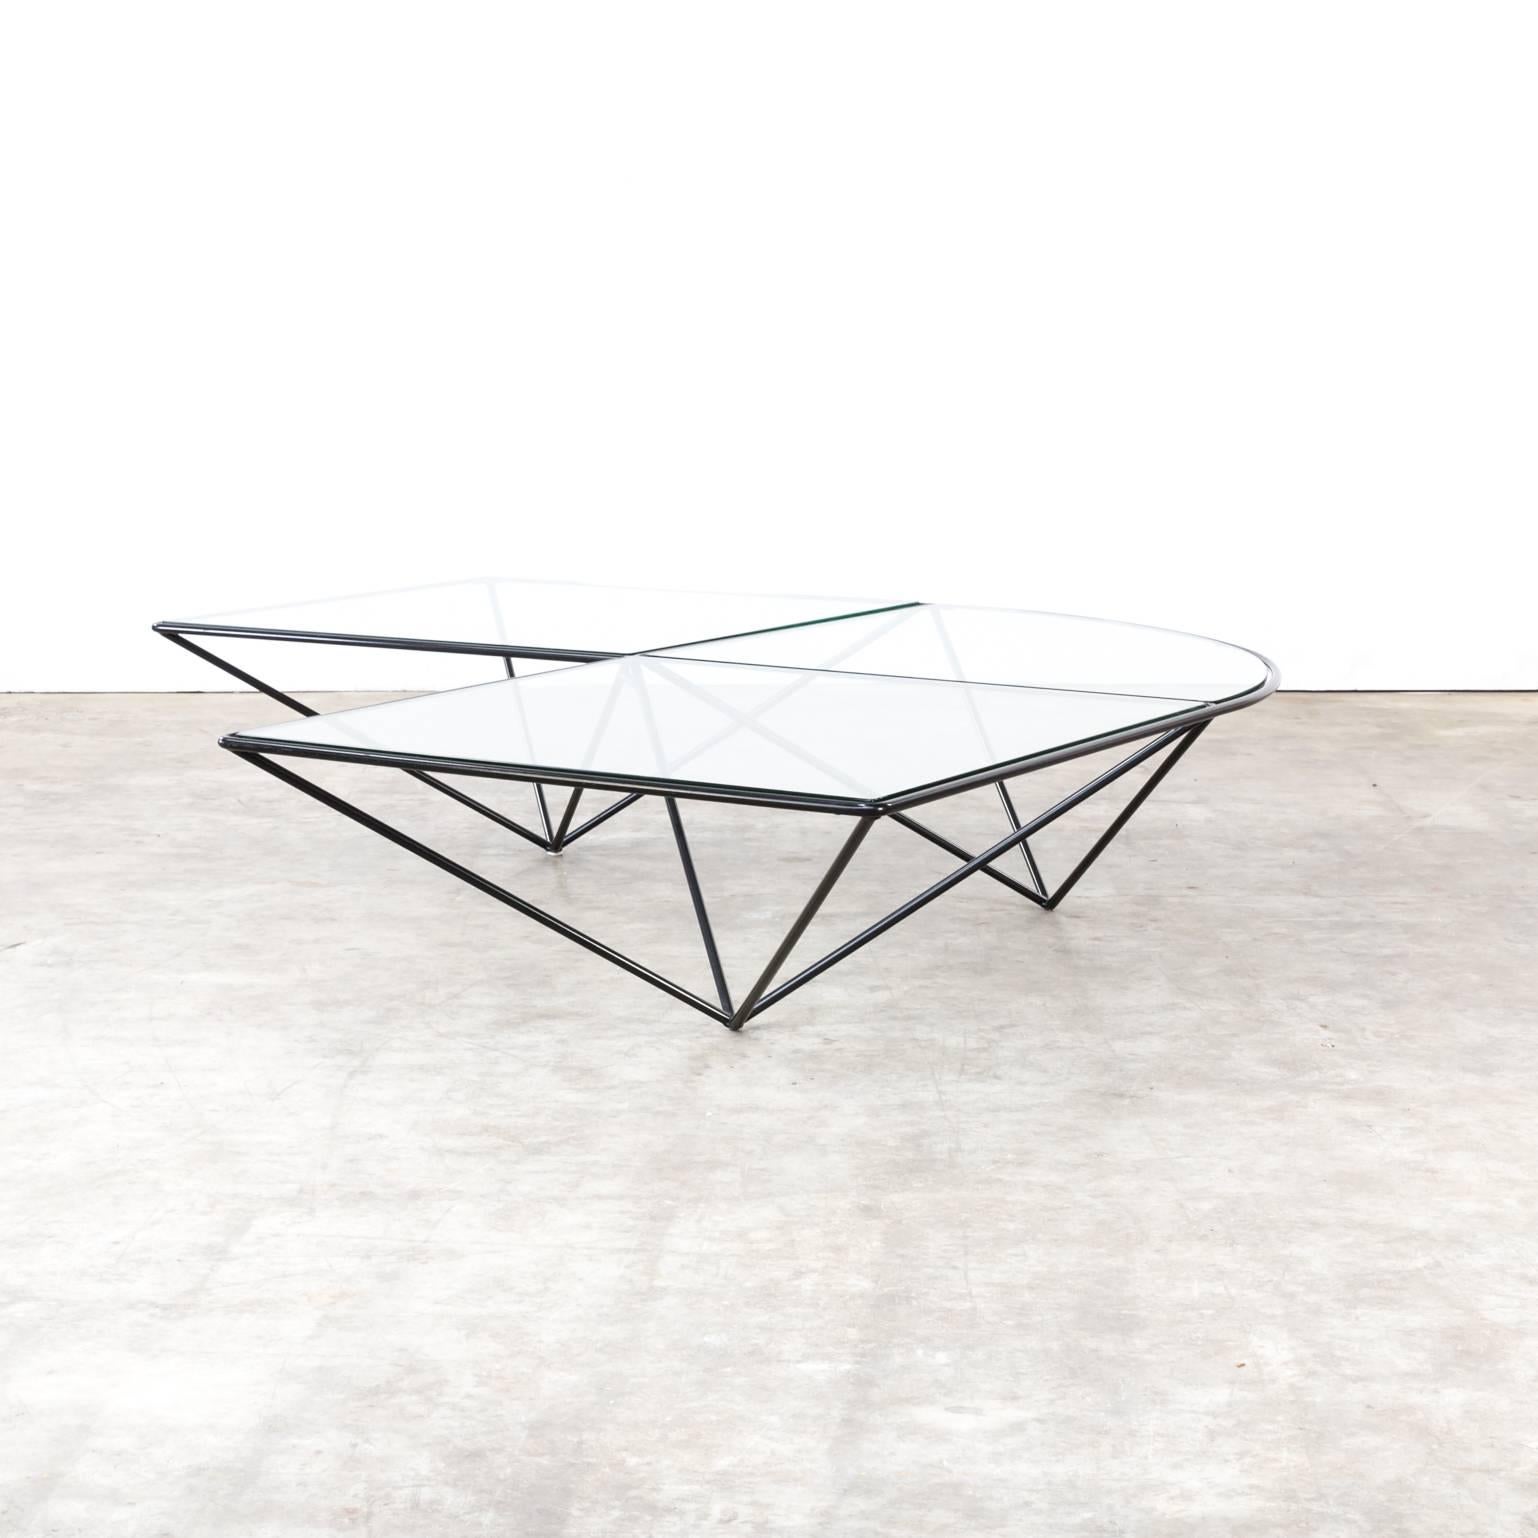 Glass corner coffee table, style of Paolo Piva for B&B Italia, in good condition consistent with age and use, small chip from the glass.